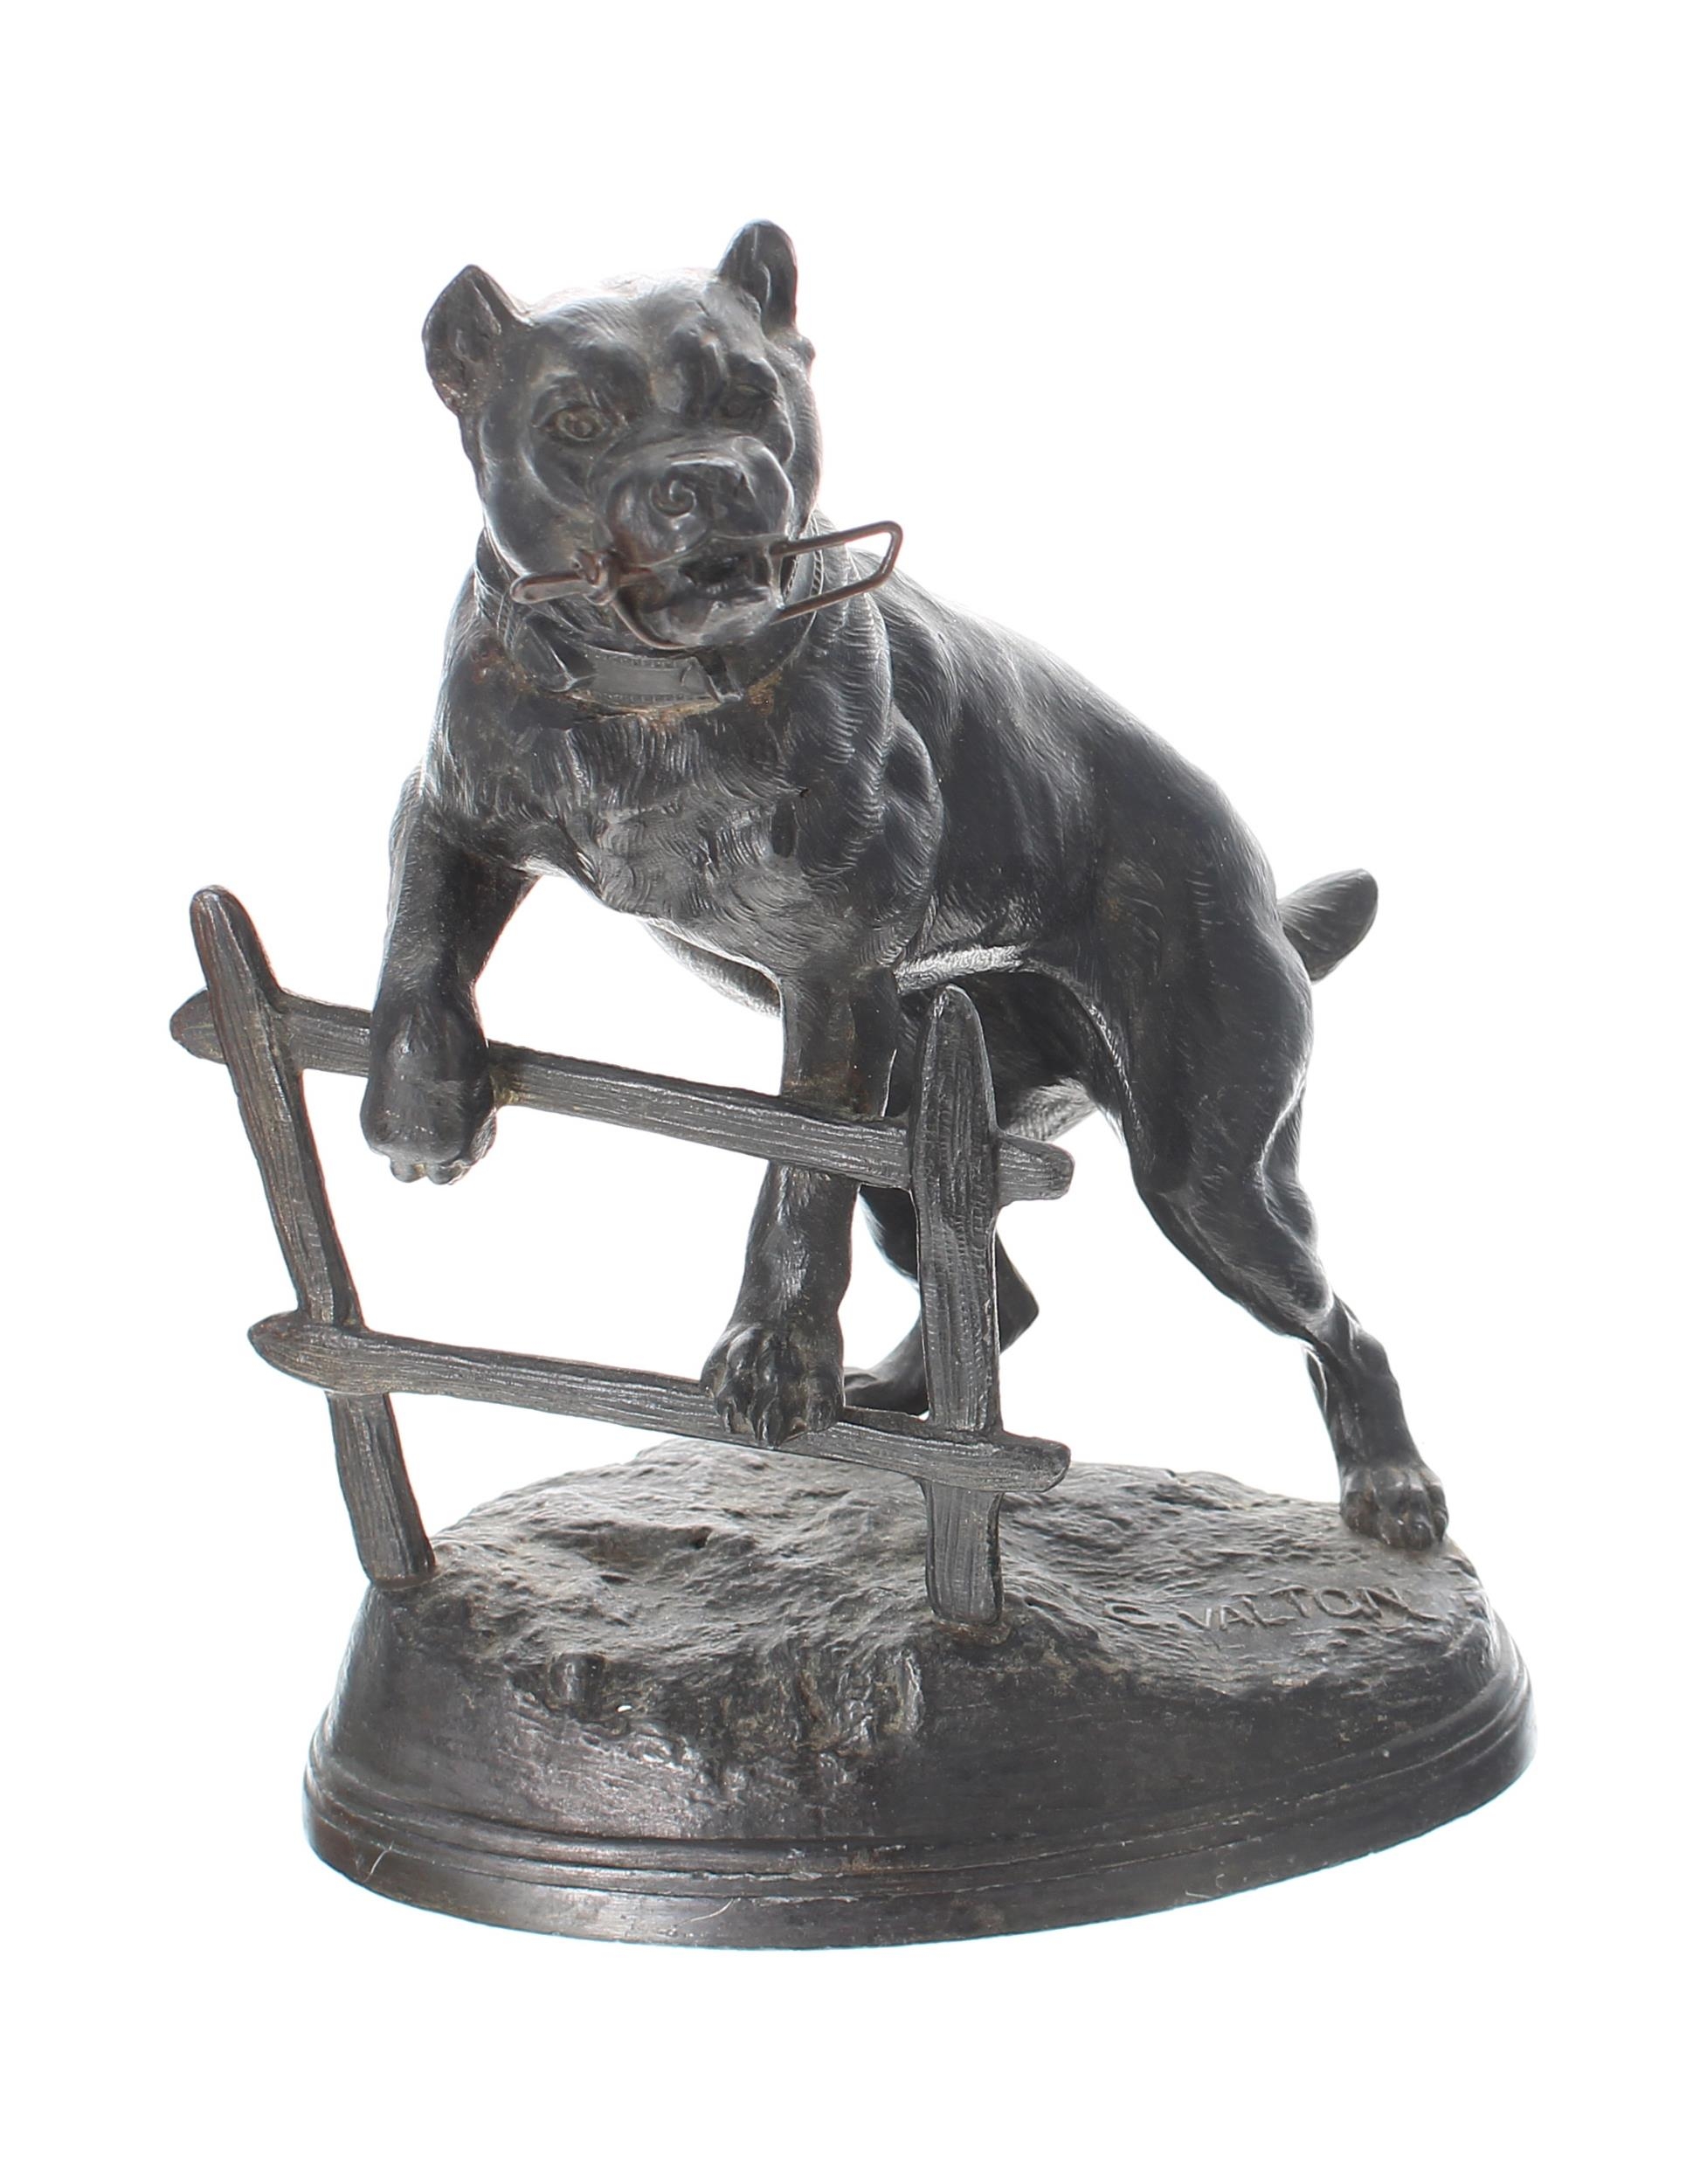 Spelter novelty pocket watch stand in the form of a guard dog upon hind legs climbing a fence,